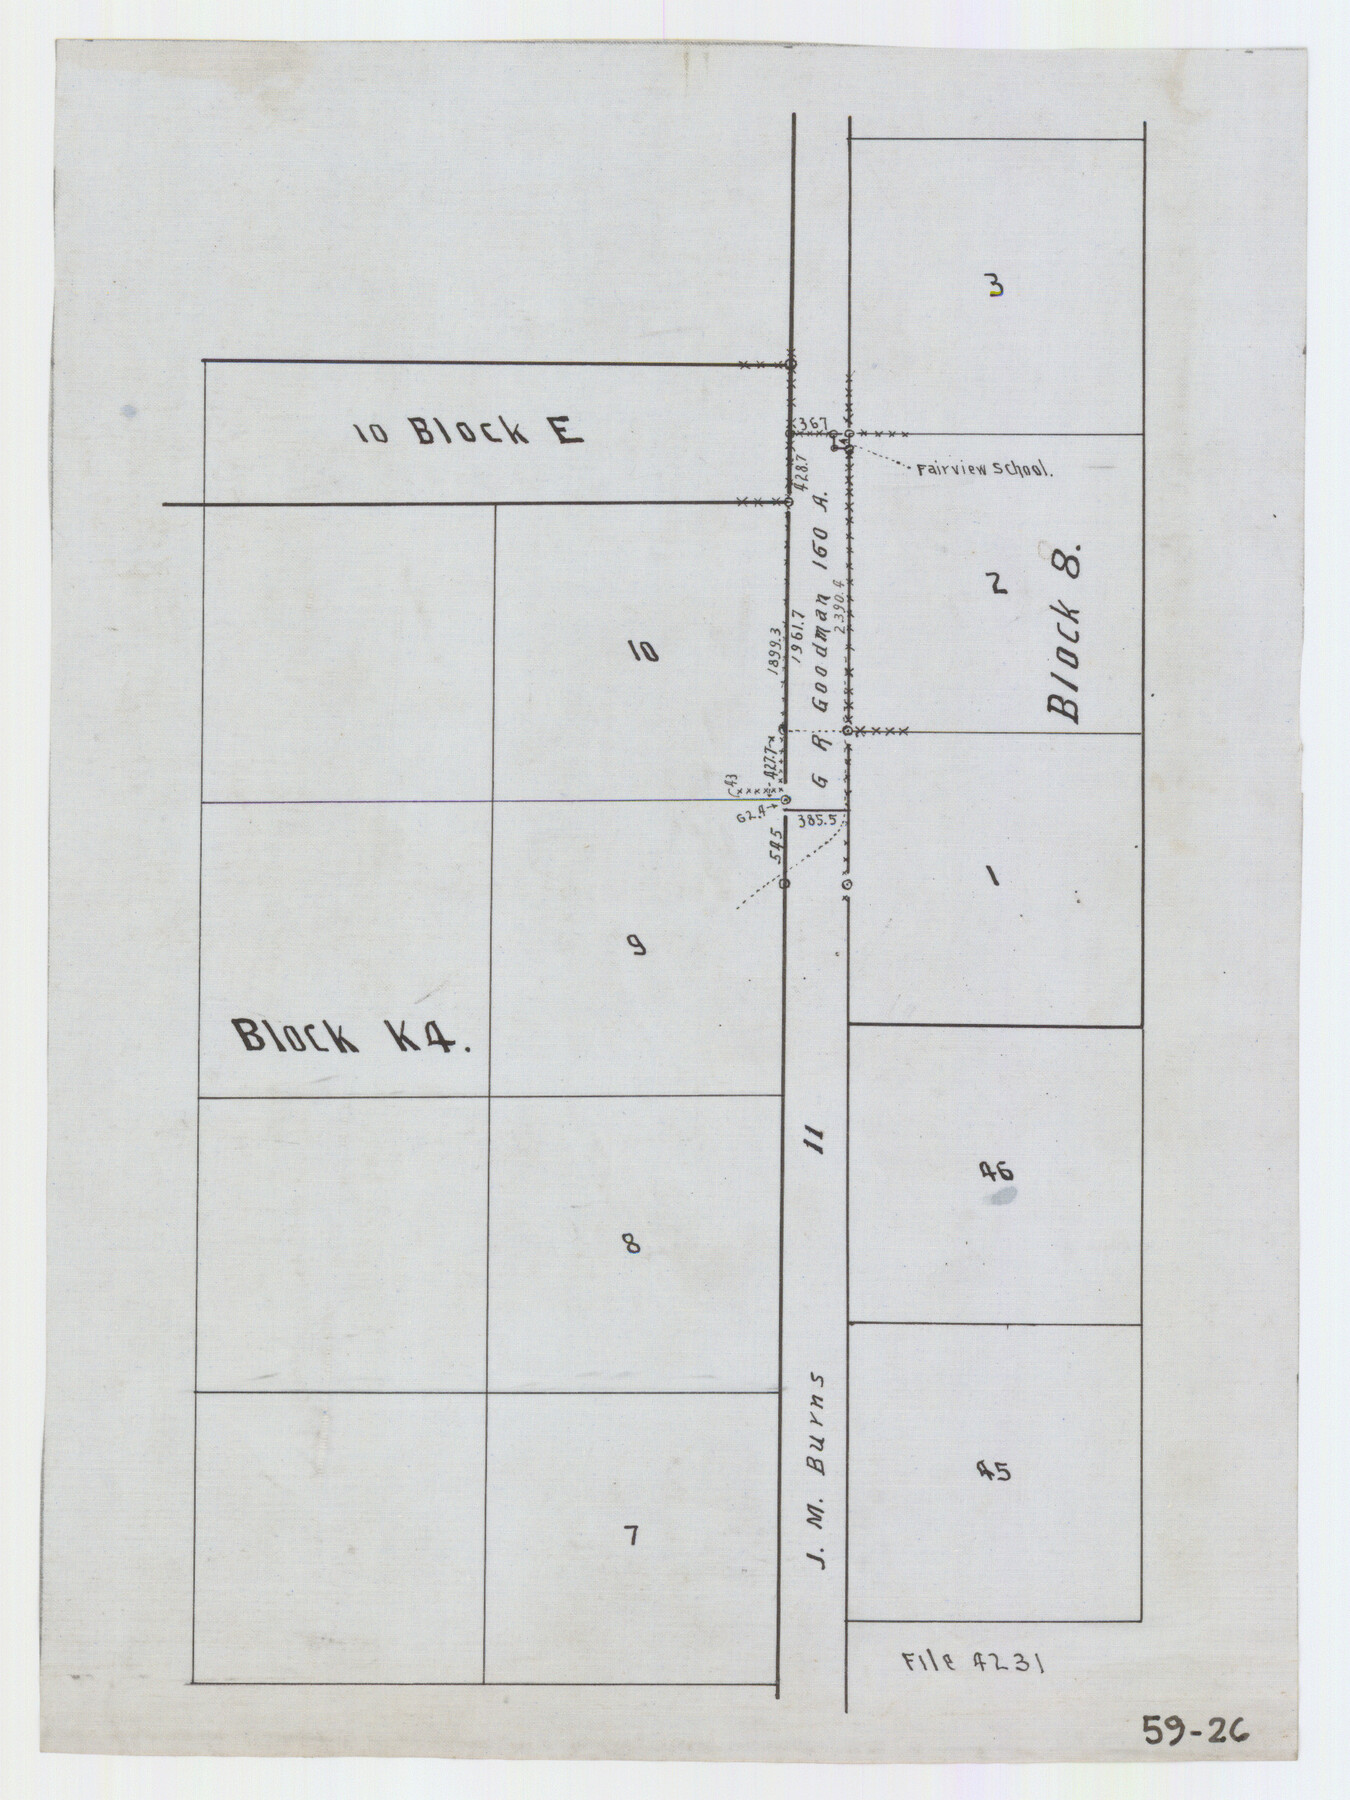 90601, [Strip between Block 8 and Block K4], Twichell Survey Records